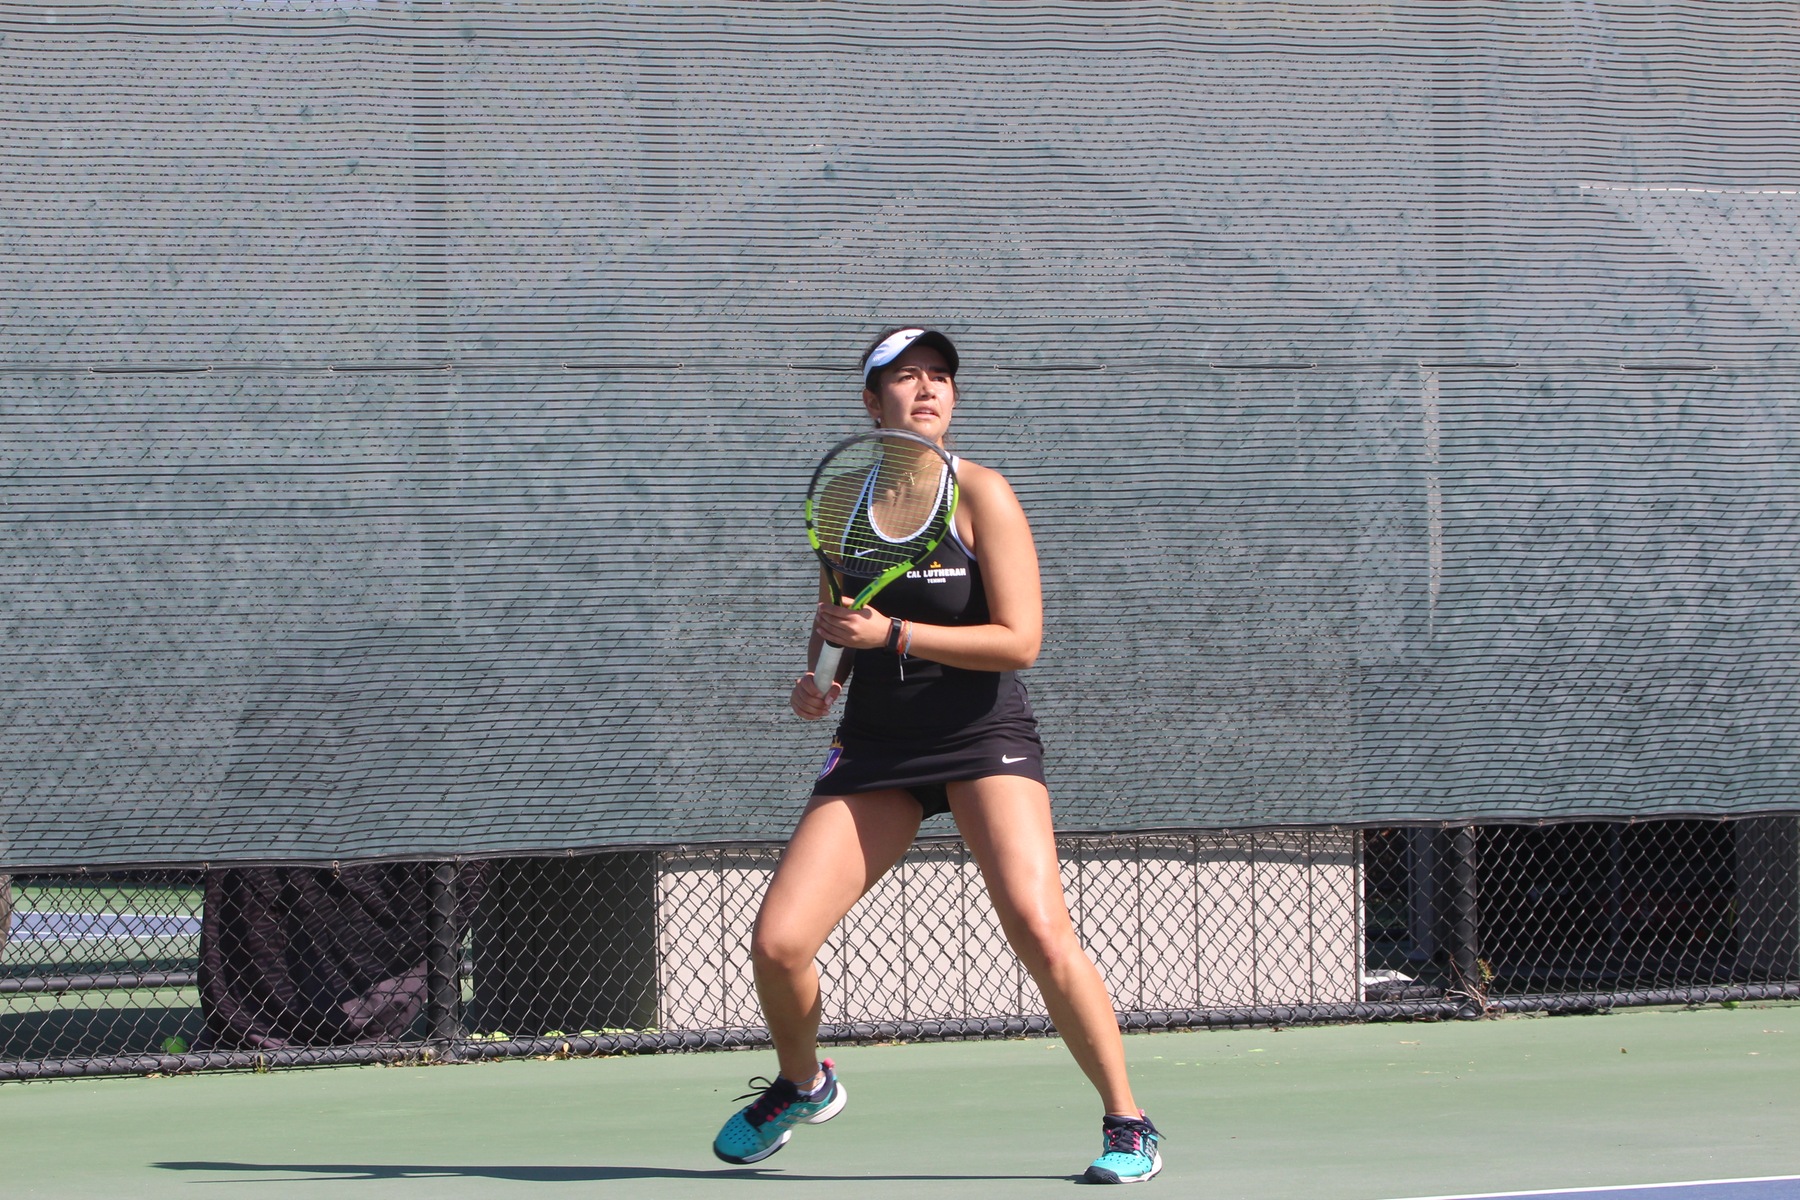 Carolina Groff Hinojosa played a pivotal role in her doubles victory for the Regals.